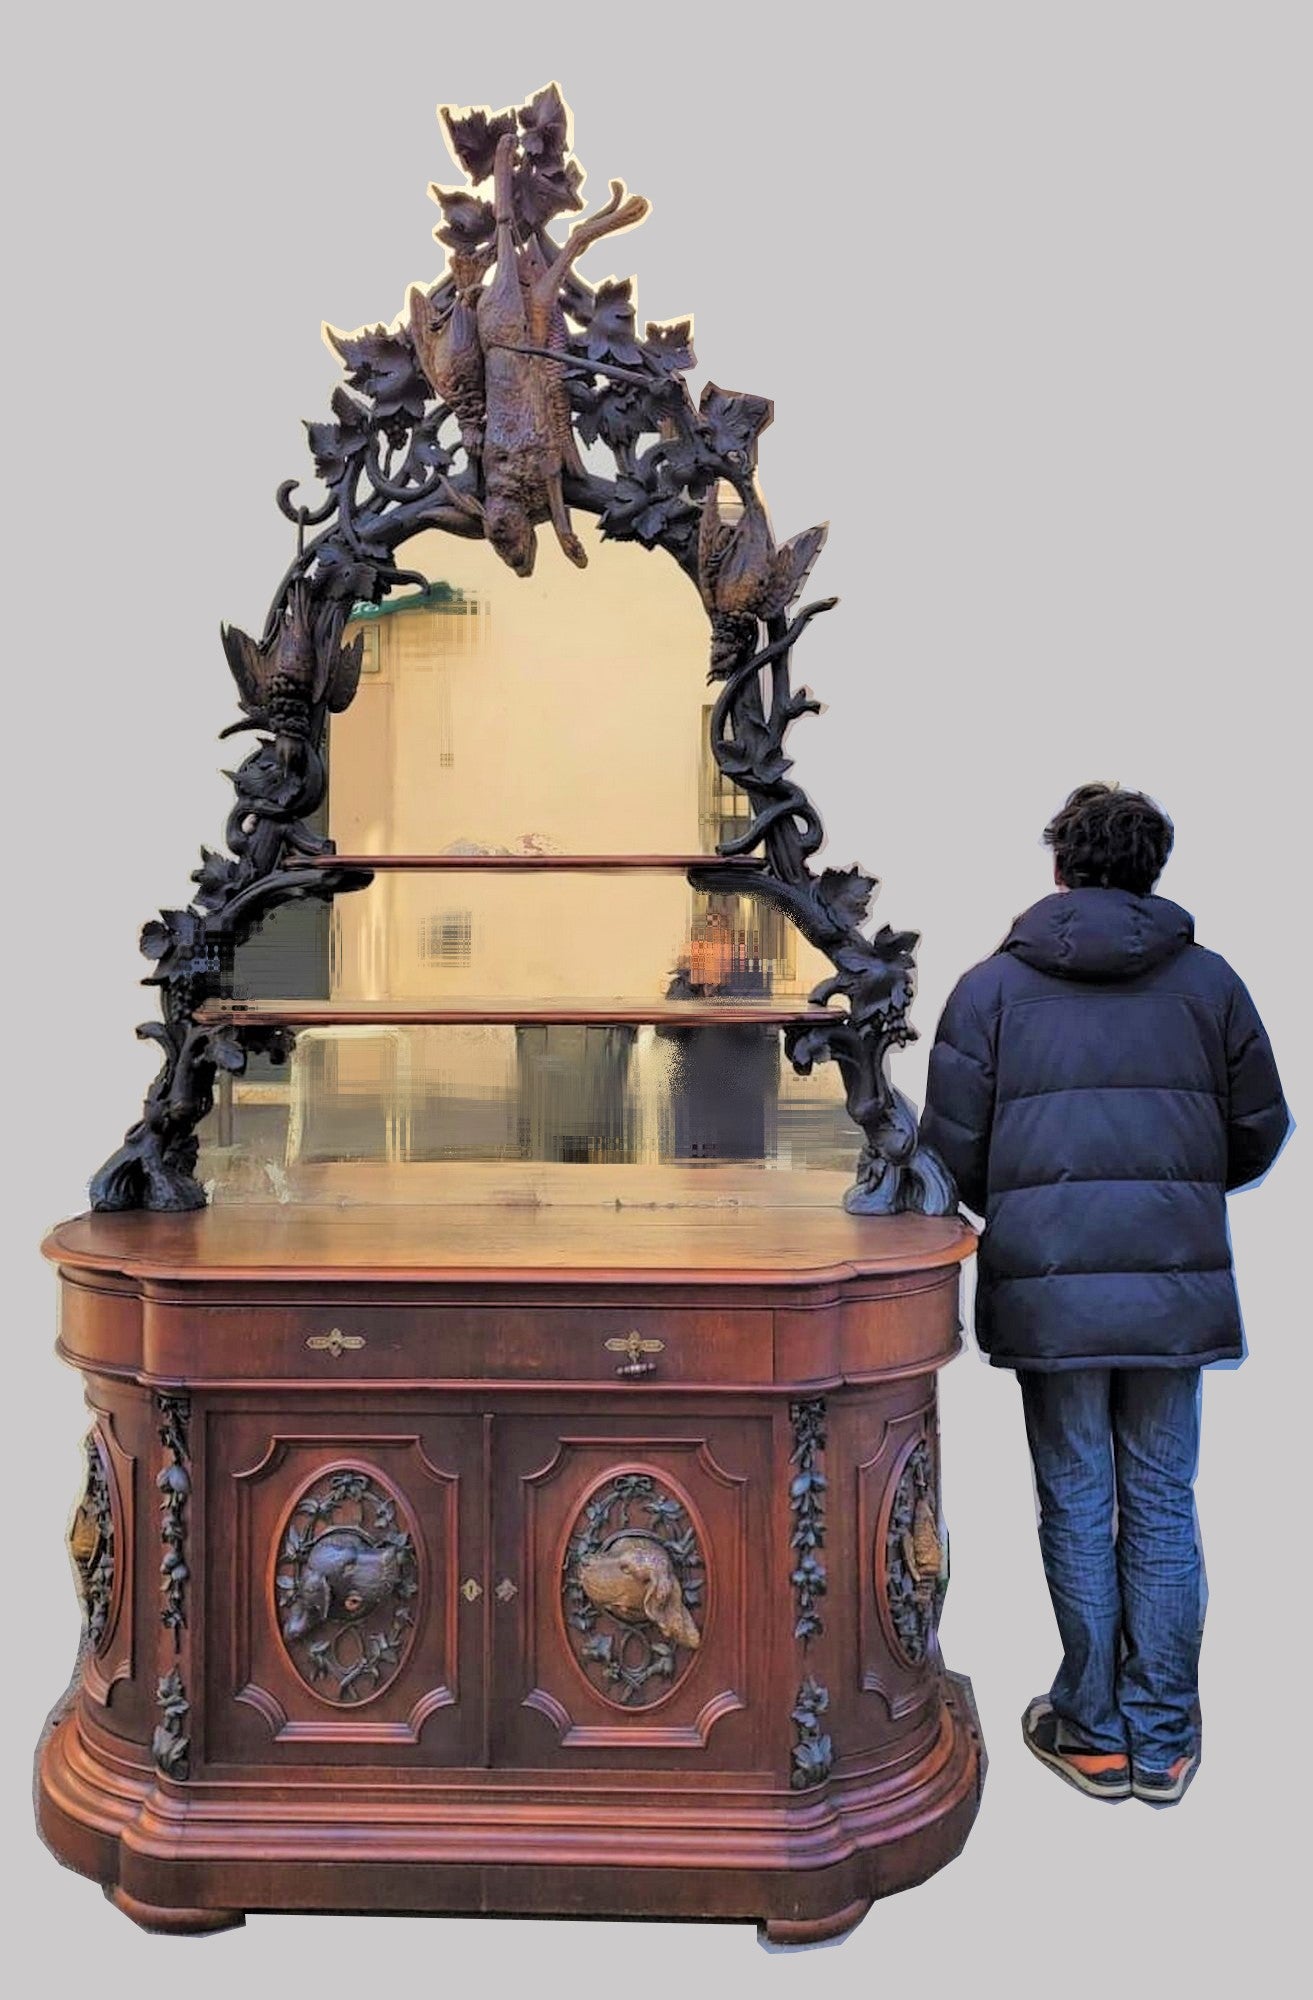 Large hunting sideboard surmounted by a spectacular mirror carved with trophies

Large sideboard in oak and mahogany veneer, opening in front with 2 doors and 1 drawer, rounded sides: the doors are decorated with medallions with dog heads in